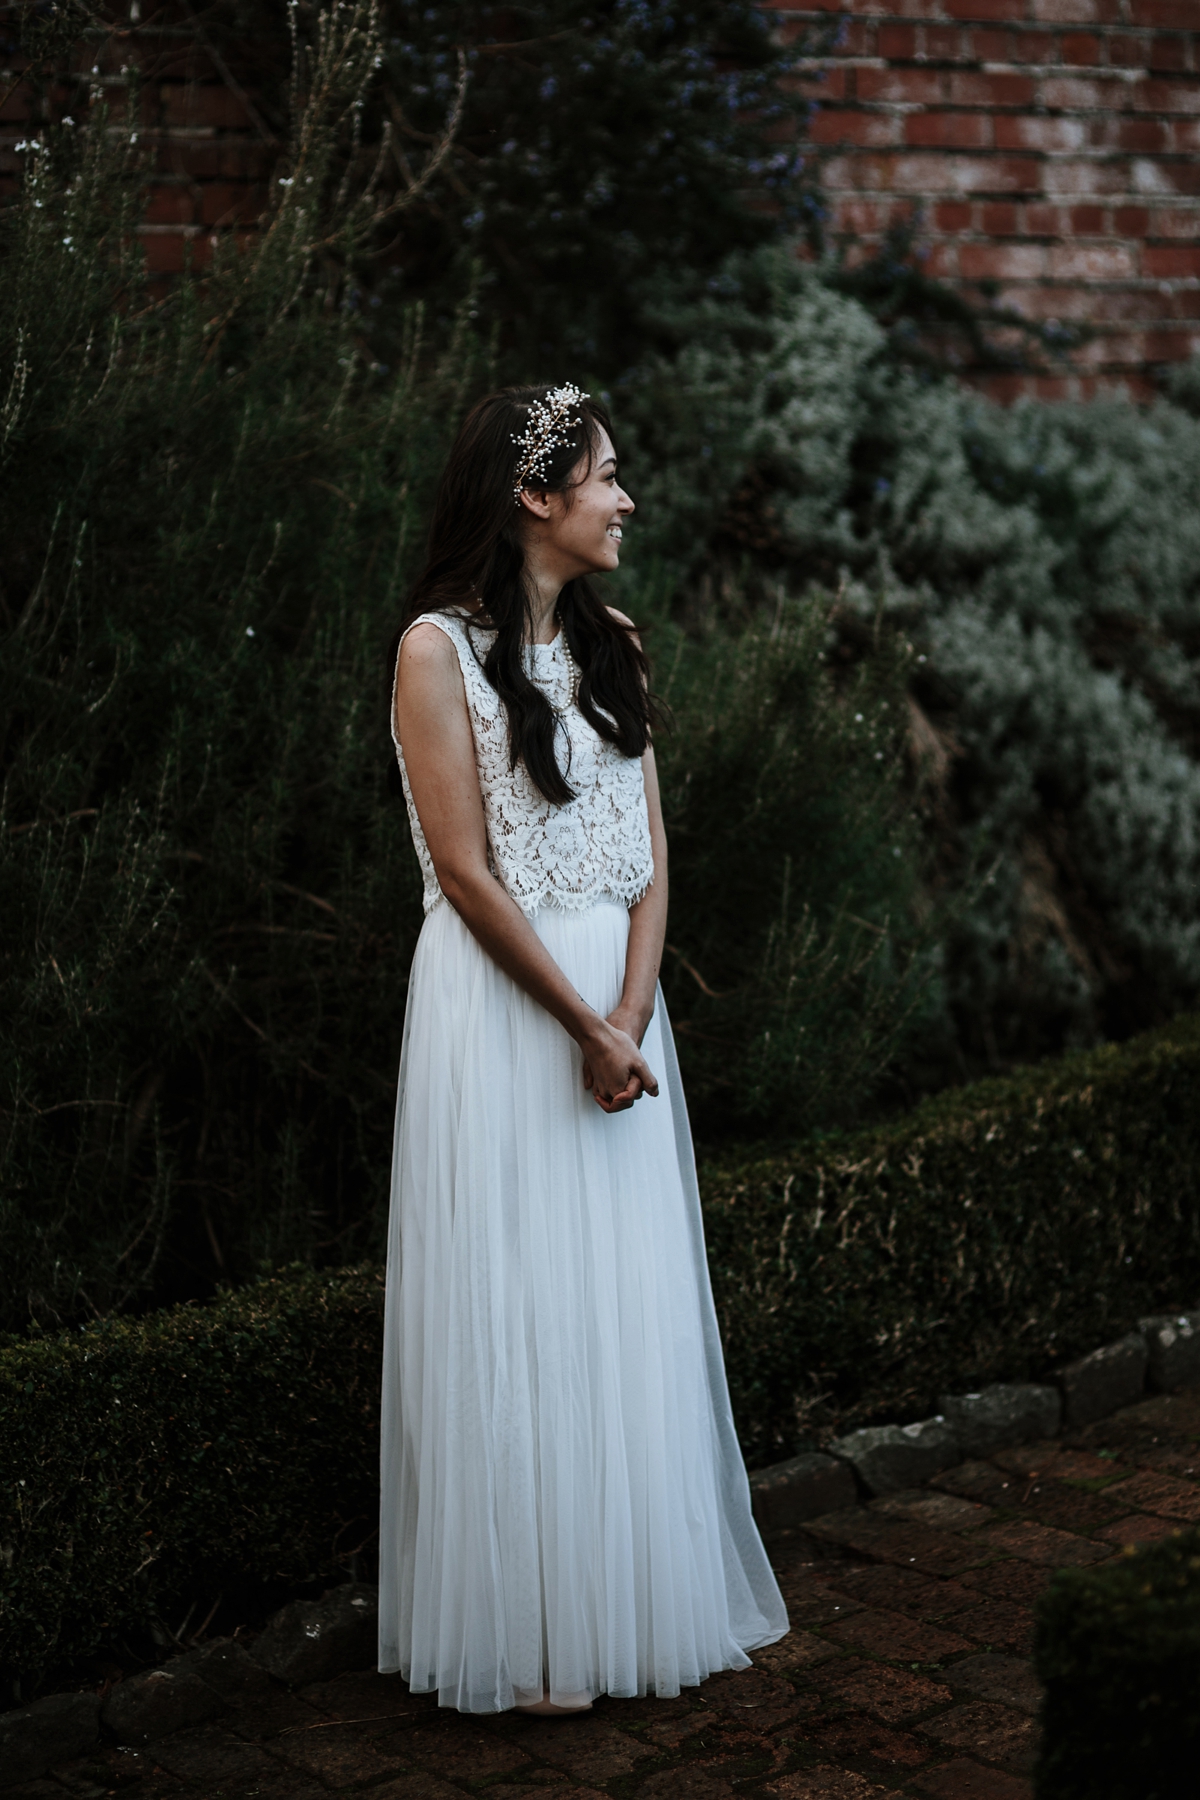 19 A BHLDN dress for a low key and intimate wedding